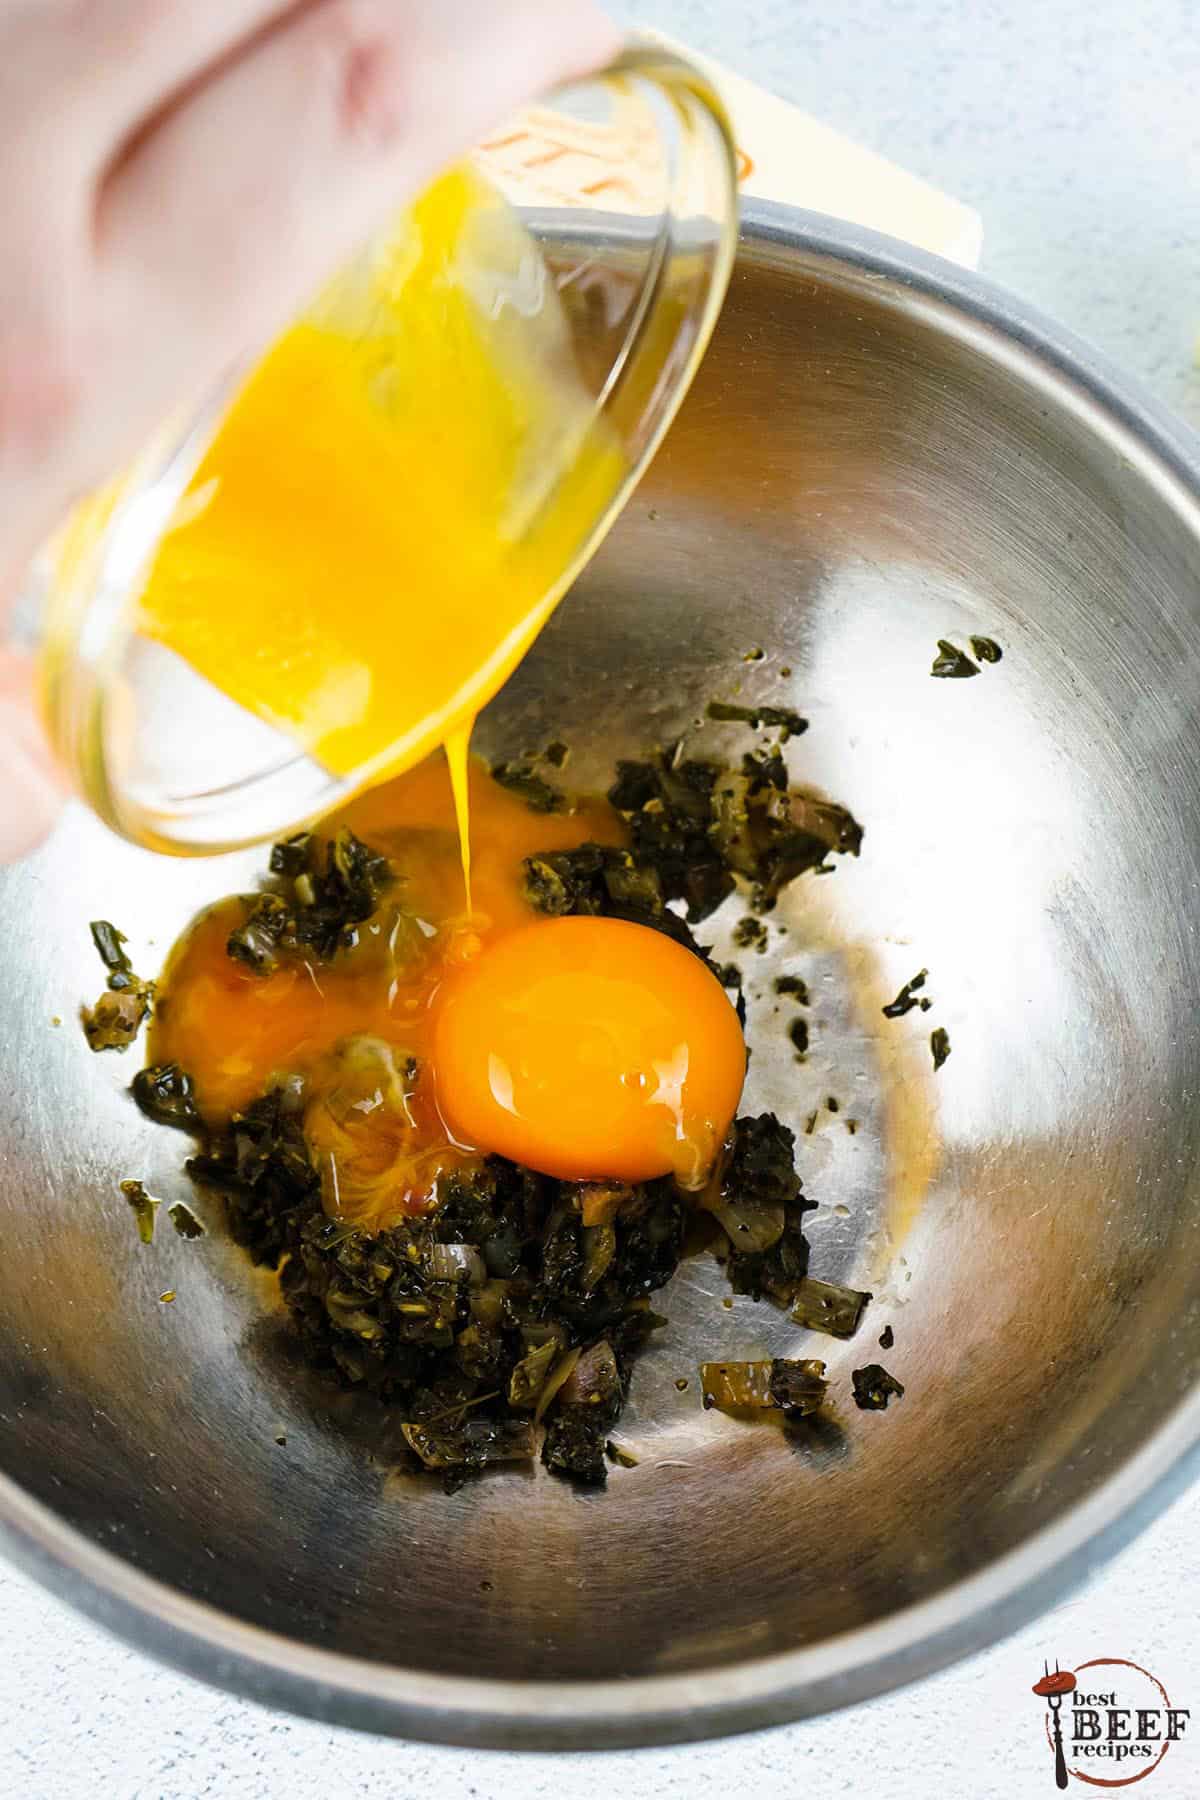 egg yolks being added to a metal bowl full of reduced oil and herbs